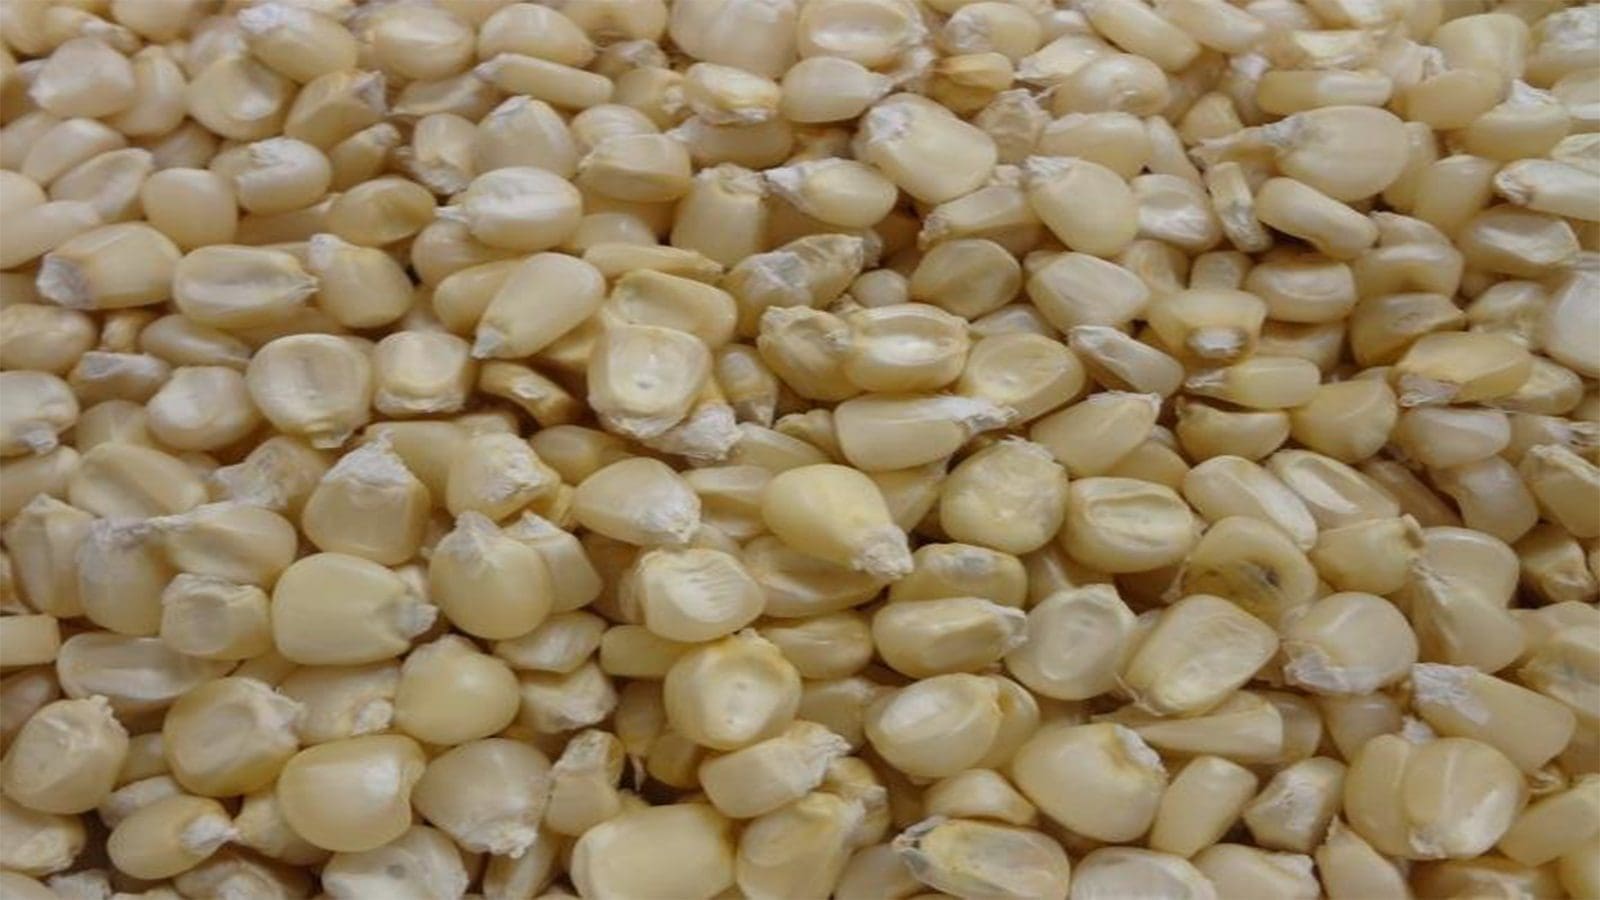 Maize prices in Malawi on a downward trajectory as formal imports take shape-Study